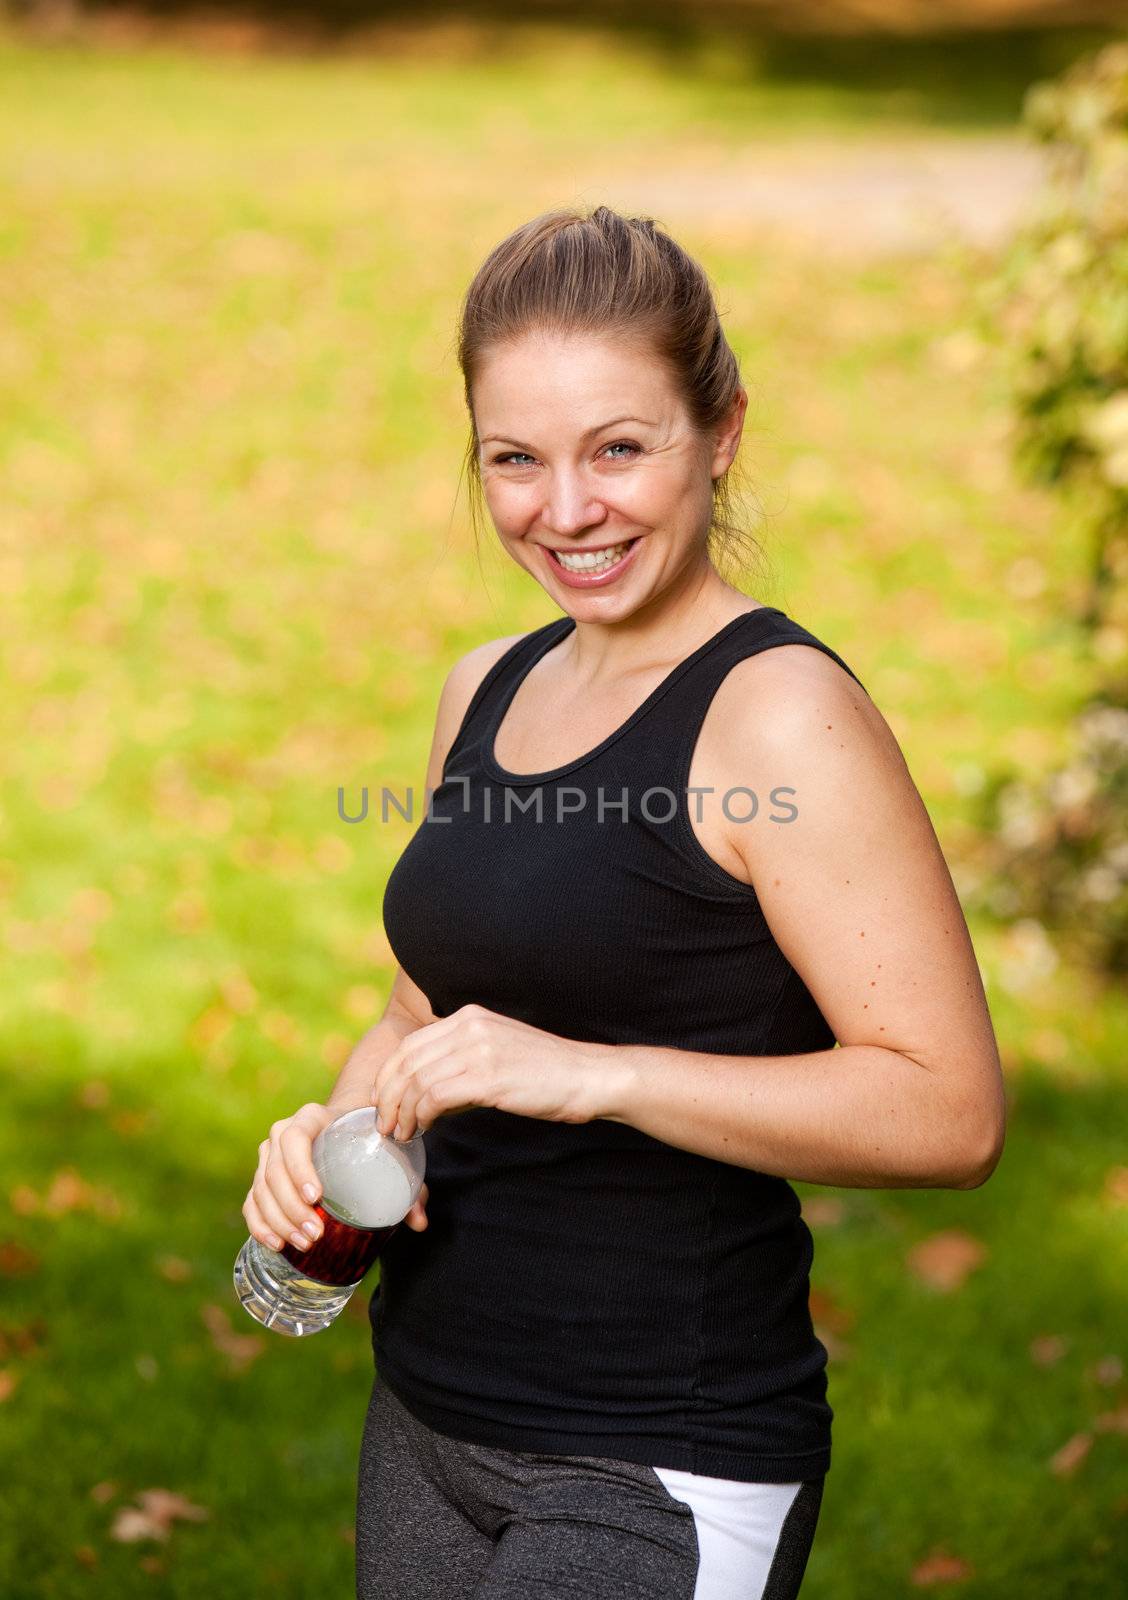 A woman taking a break from exercising in the park